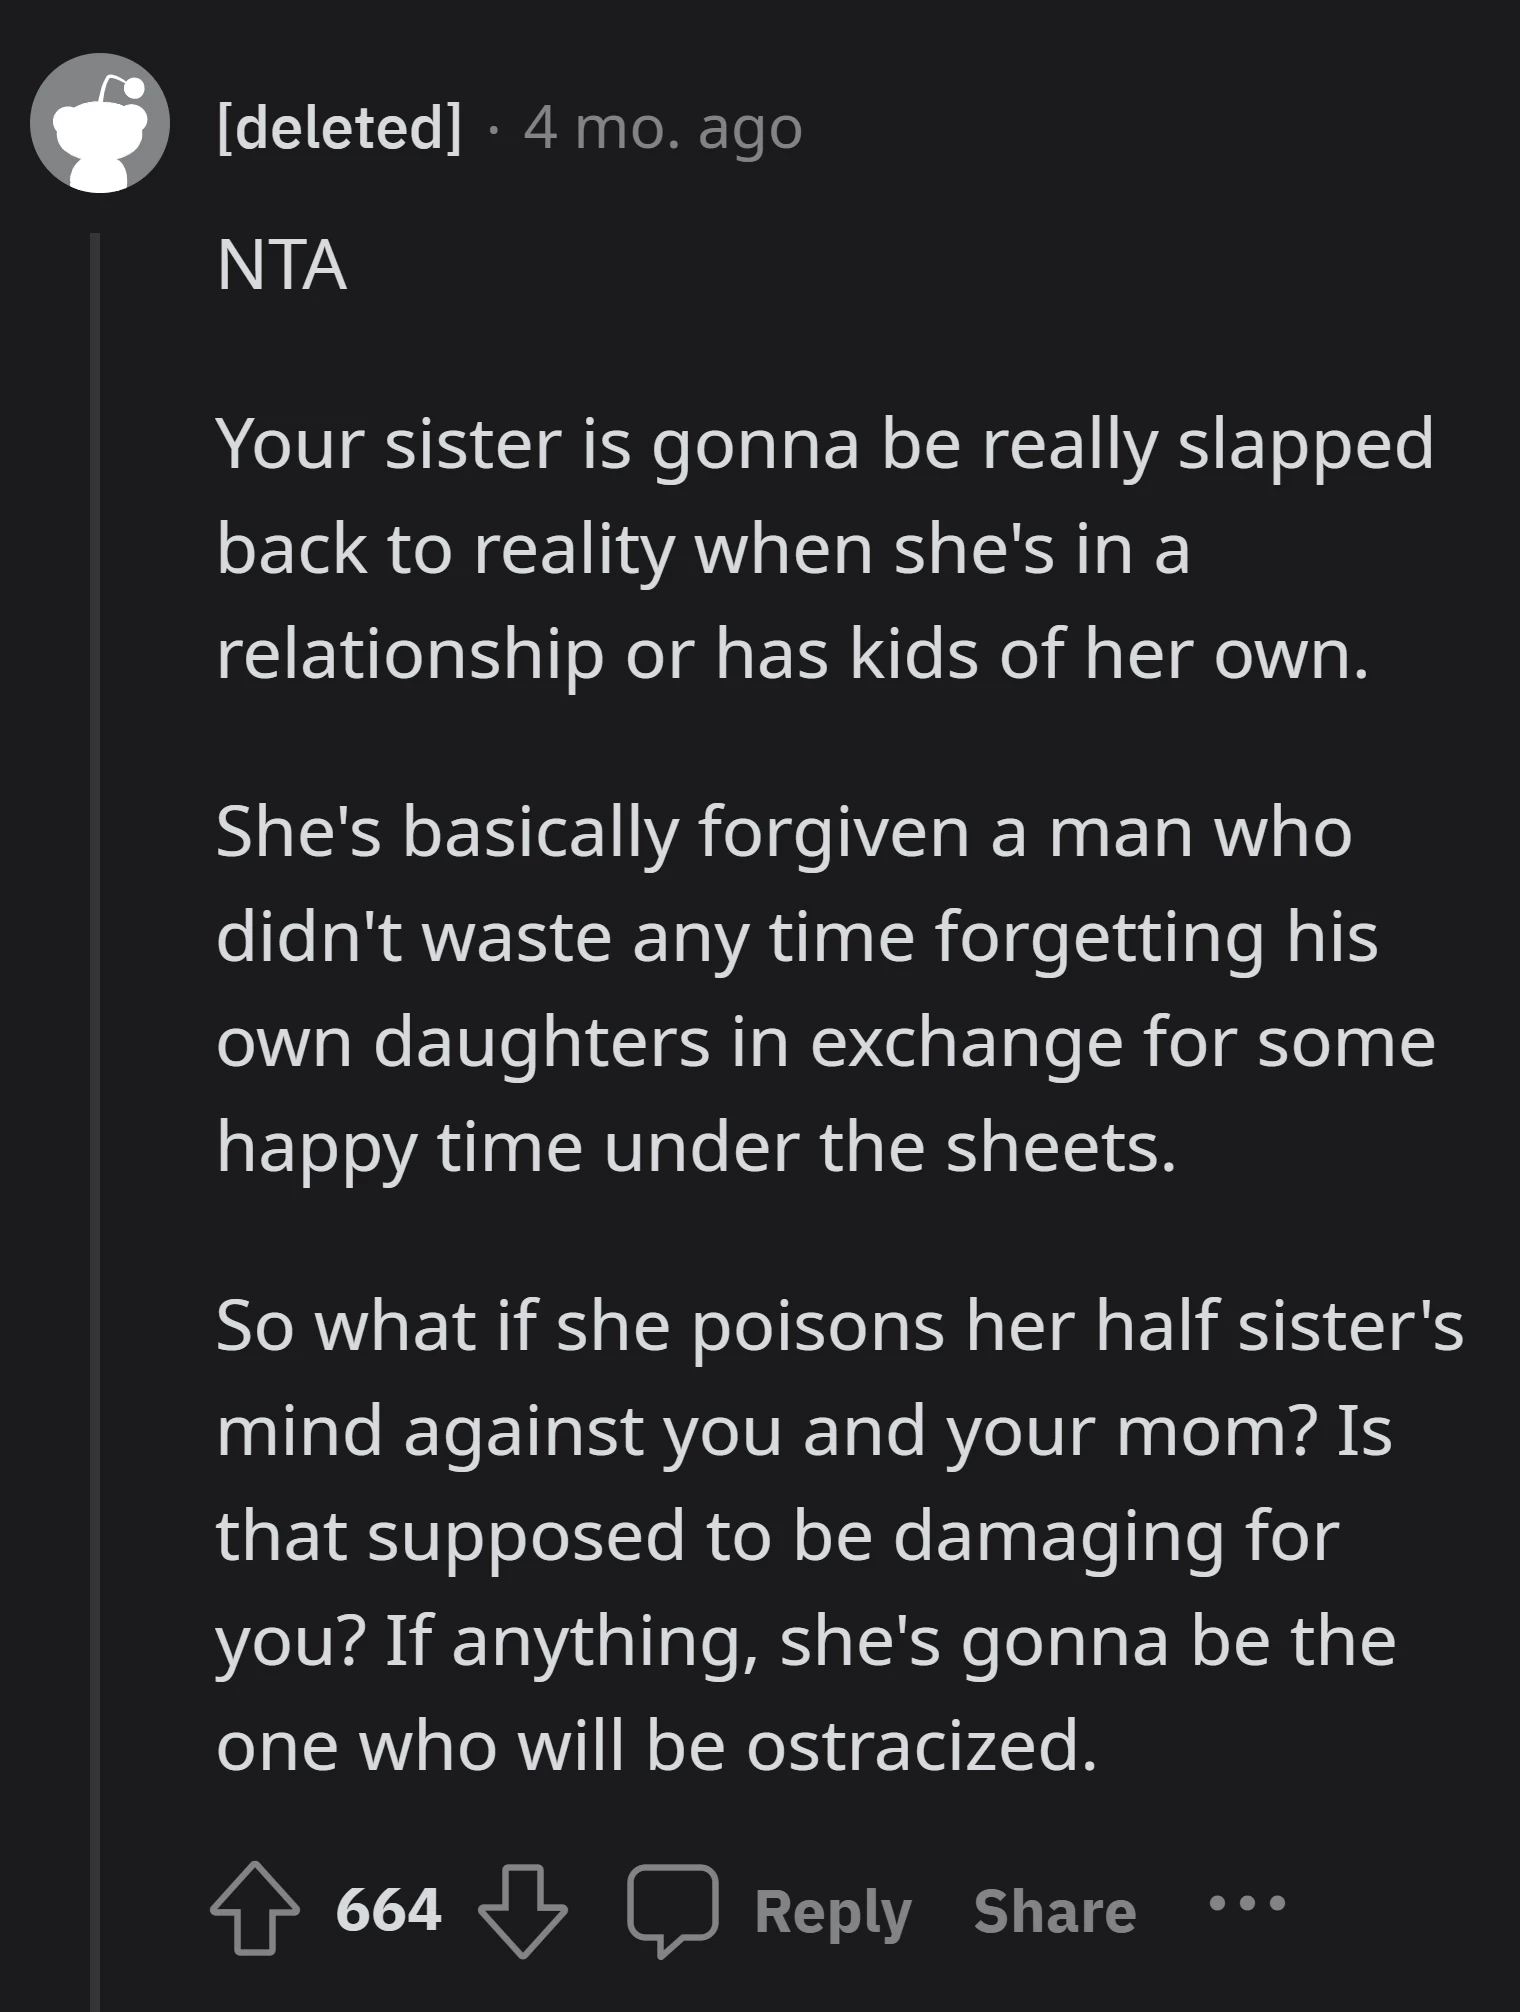 This person predicts OP's sister will face reality when in a relationship or with her own kids